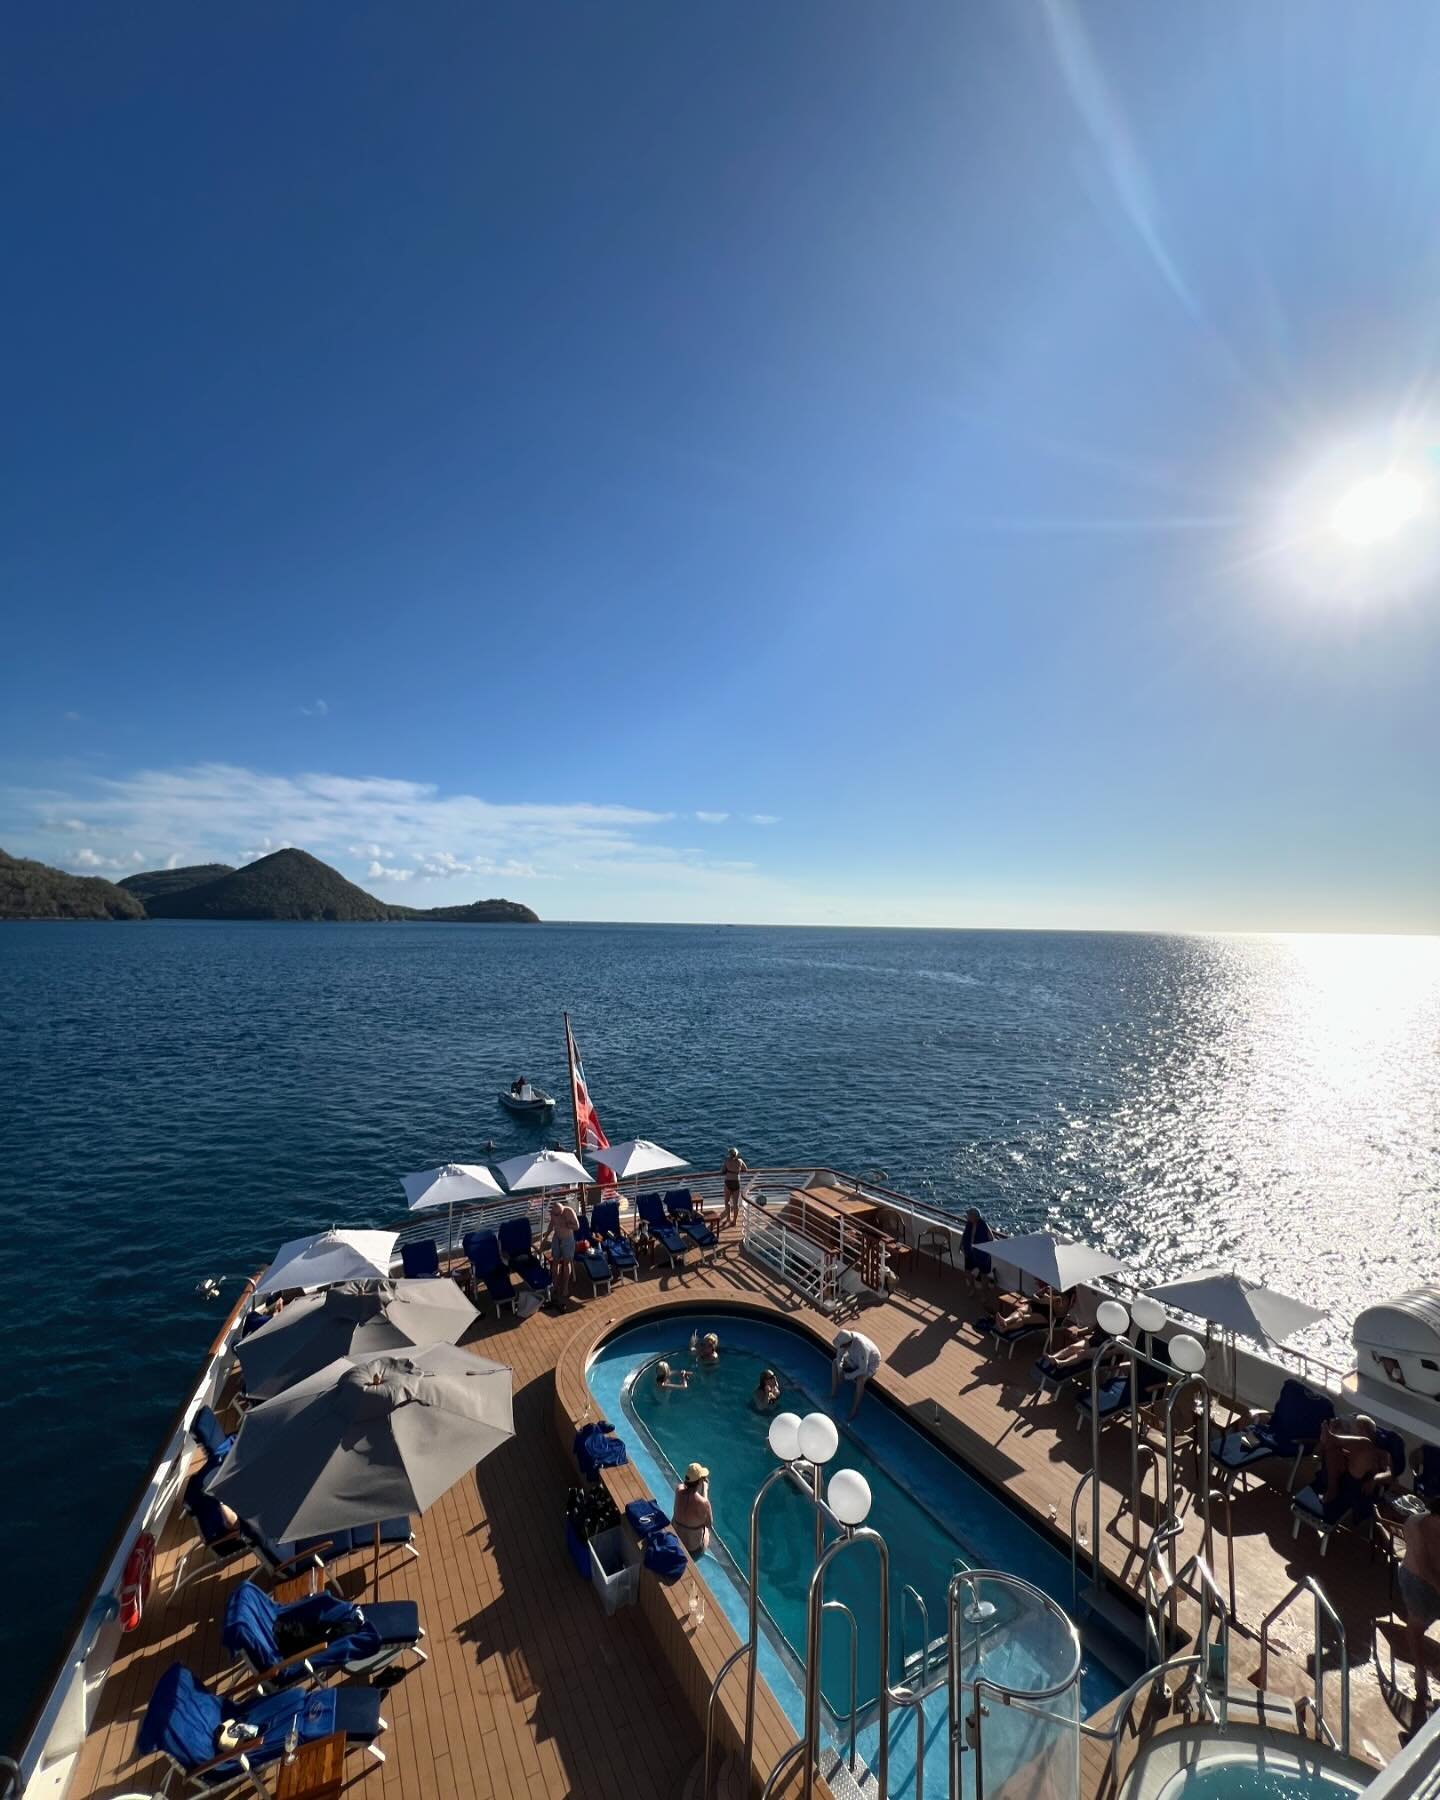 Dreaming about floating through the warm Caribbean waters, one island at a time? Greetings from the boutique ship SeaDream! A special option for those who want a yachting experience rather than a cruise.

#islandhopping #luxuryboat #Caribbean #seadre